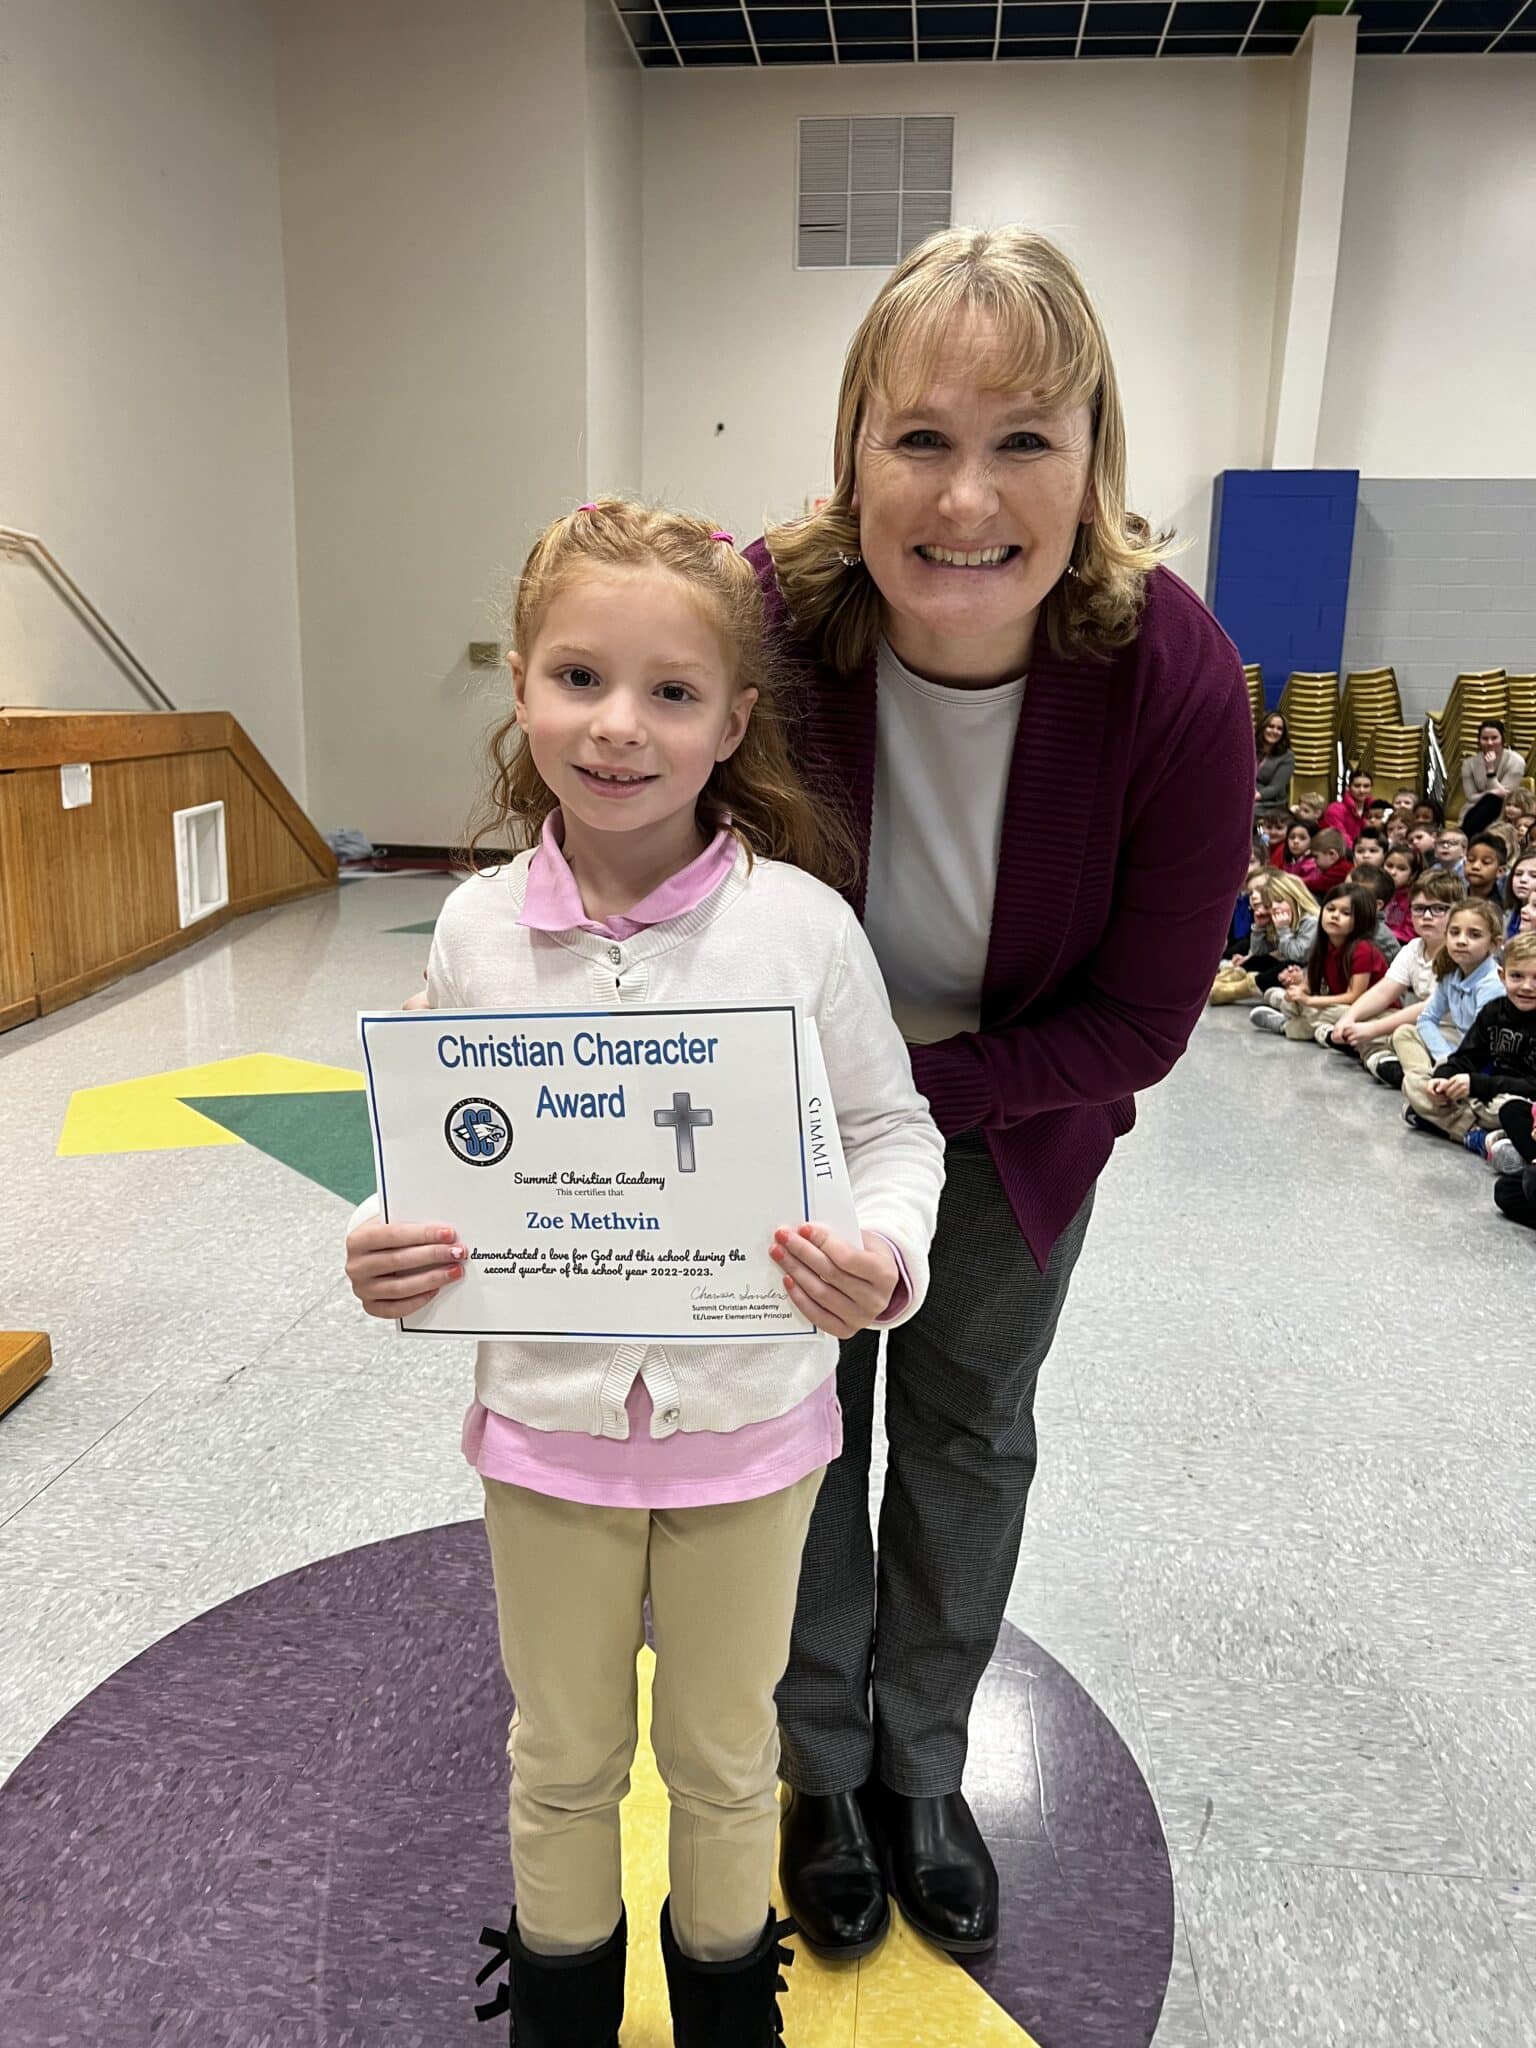 SCA second grade student Zoe Methvin, pictured with Lower Elementary Principal Charissa Sanders, received the Elementary Christian Character Award for the second quarter.